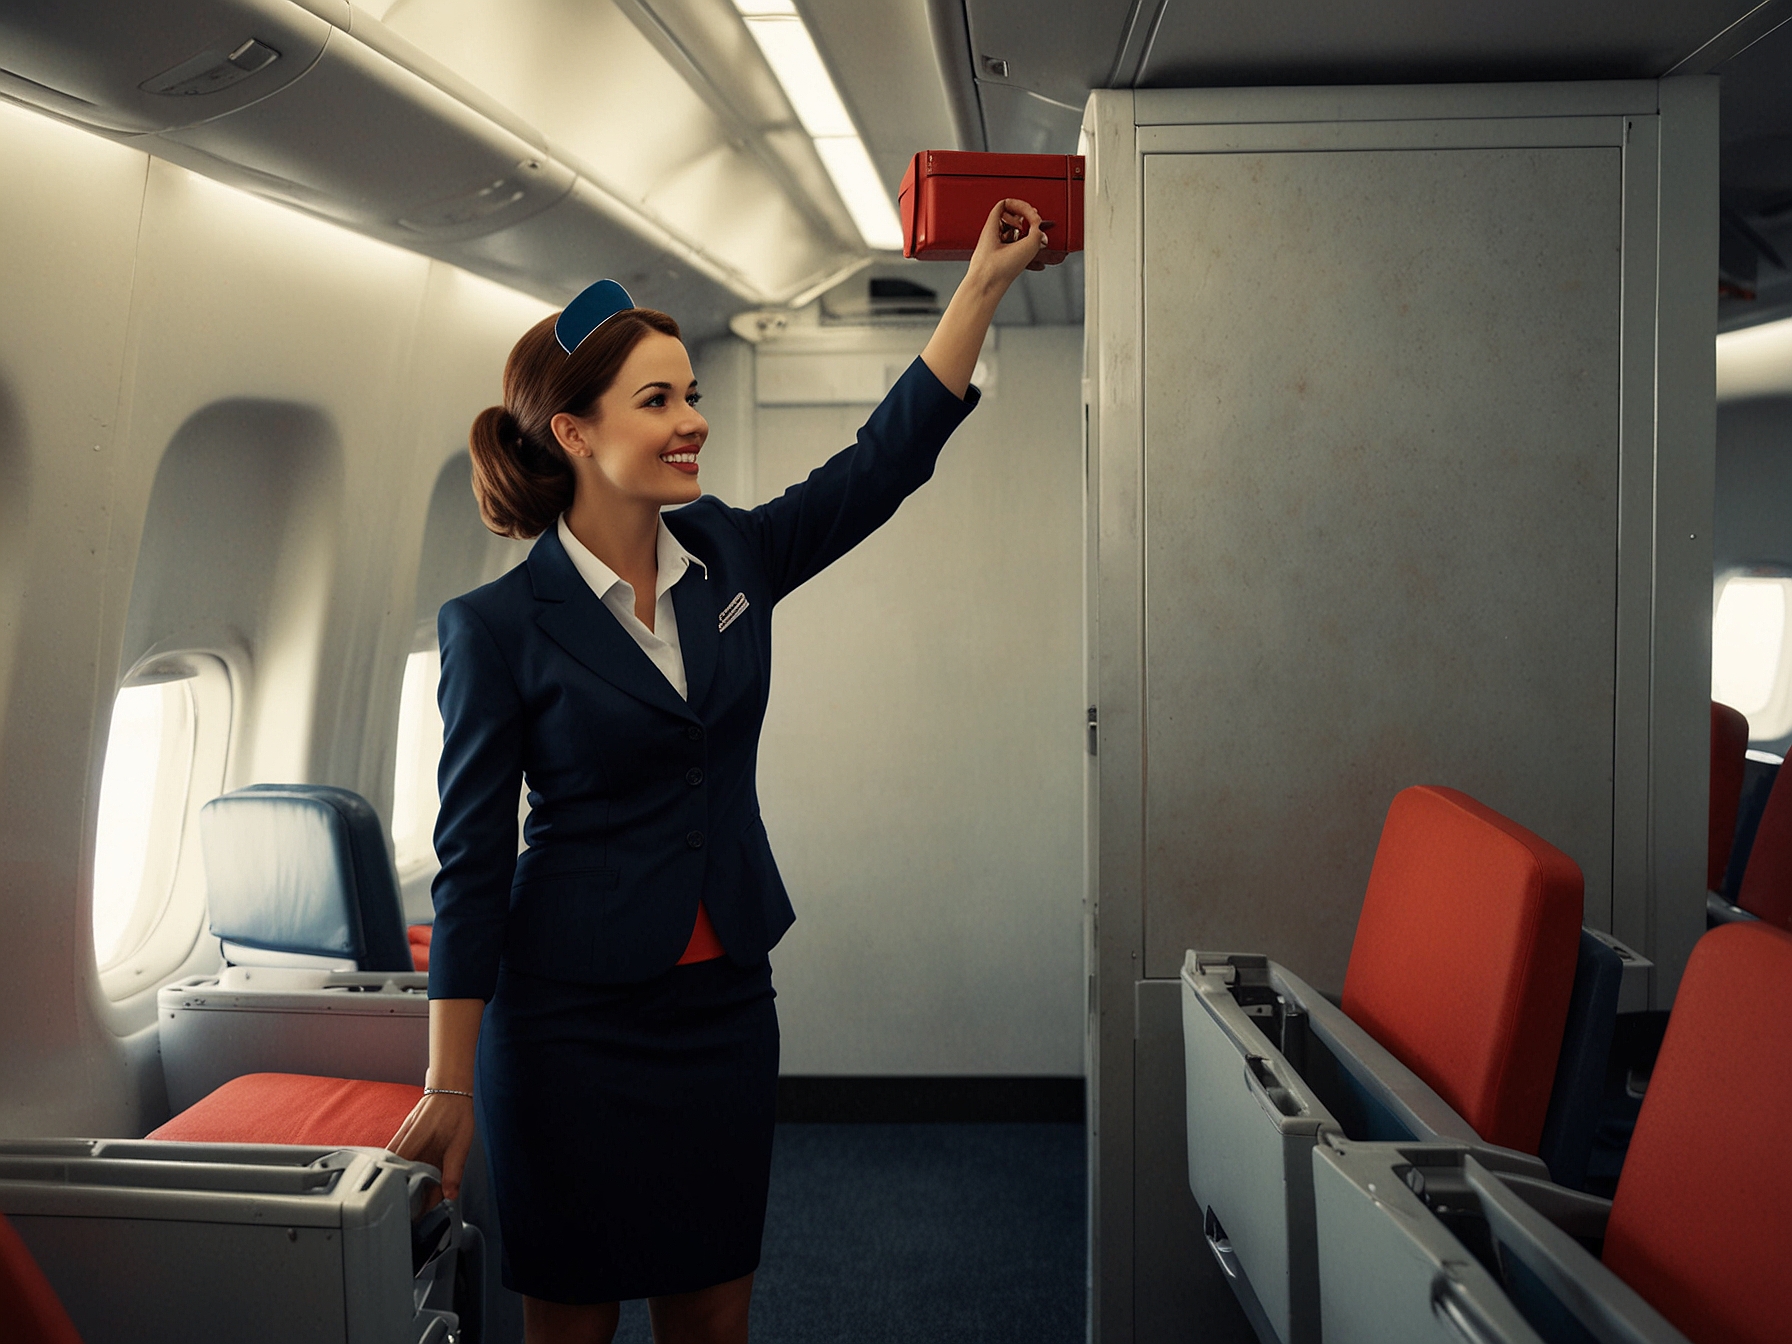 A flight attendant demonstrating how to stow luggage in the overhead locker above the seats